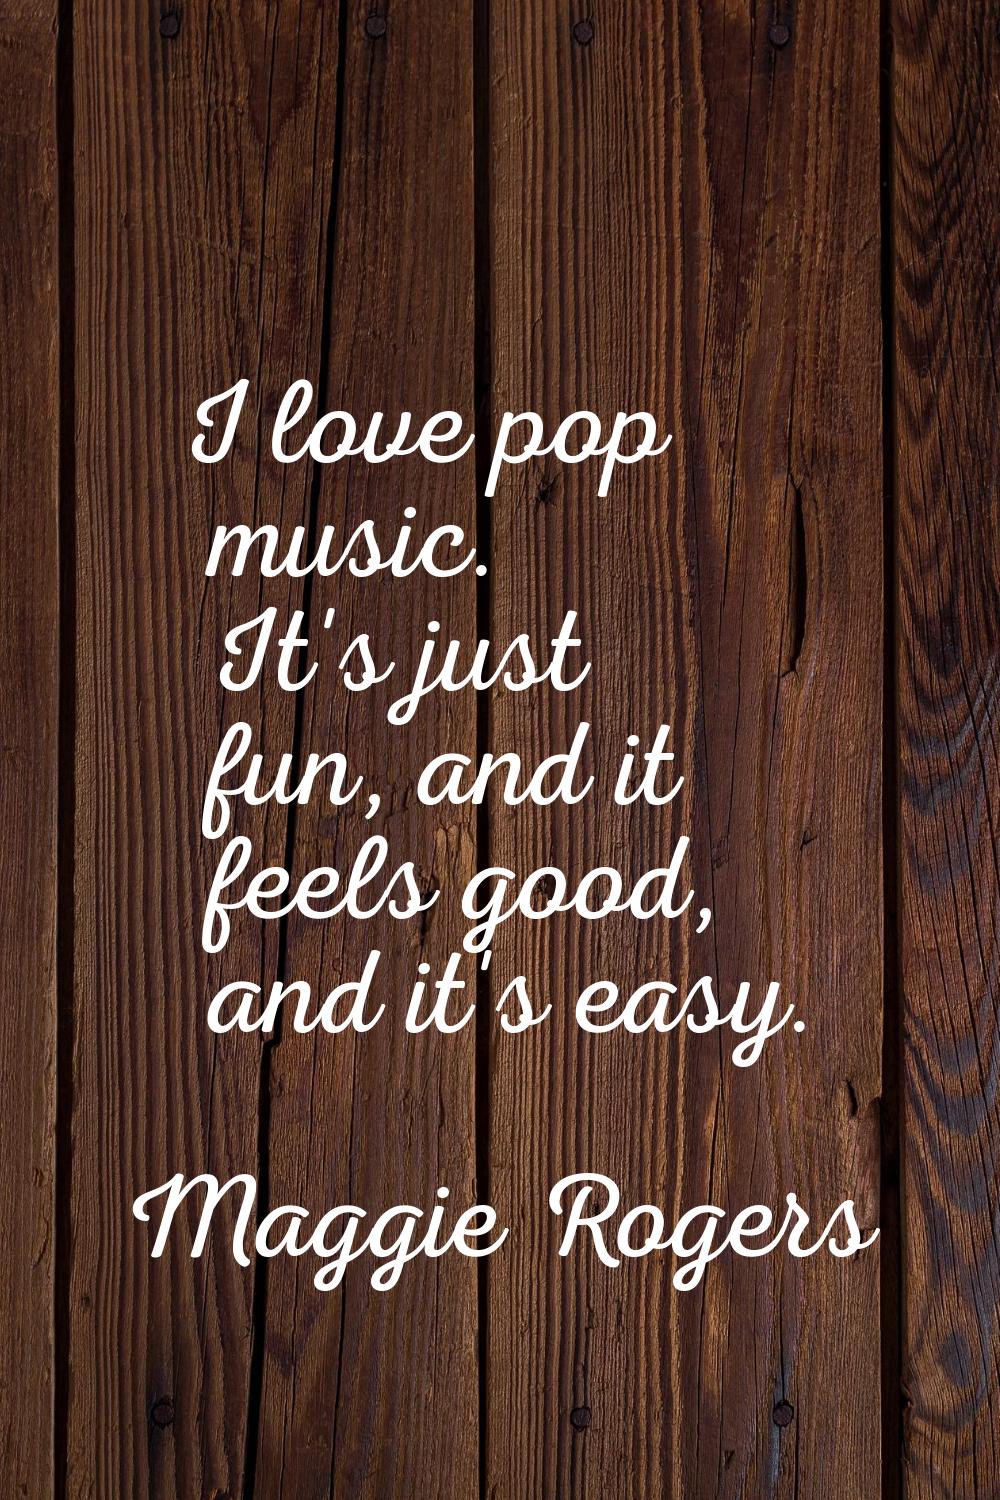 I love pop music. It's just fun, and it feels good, and it's easy.